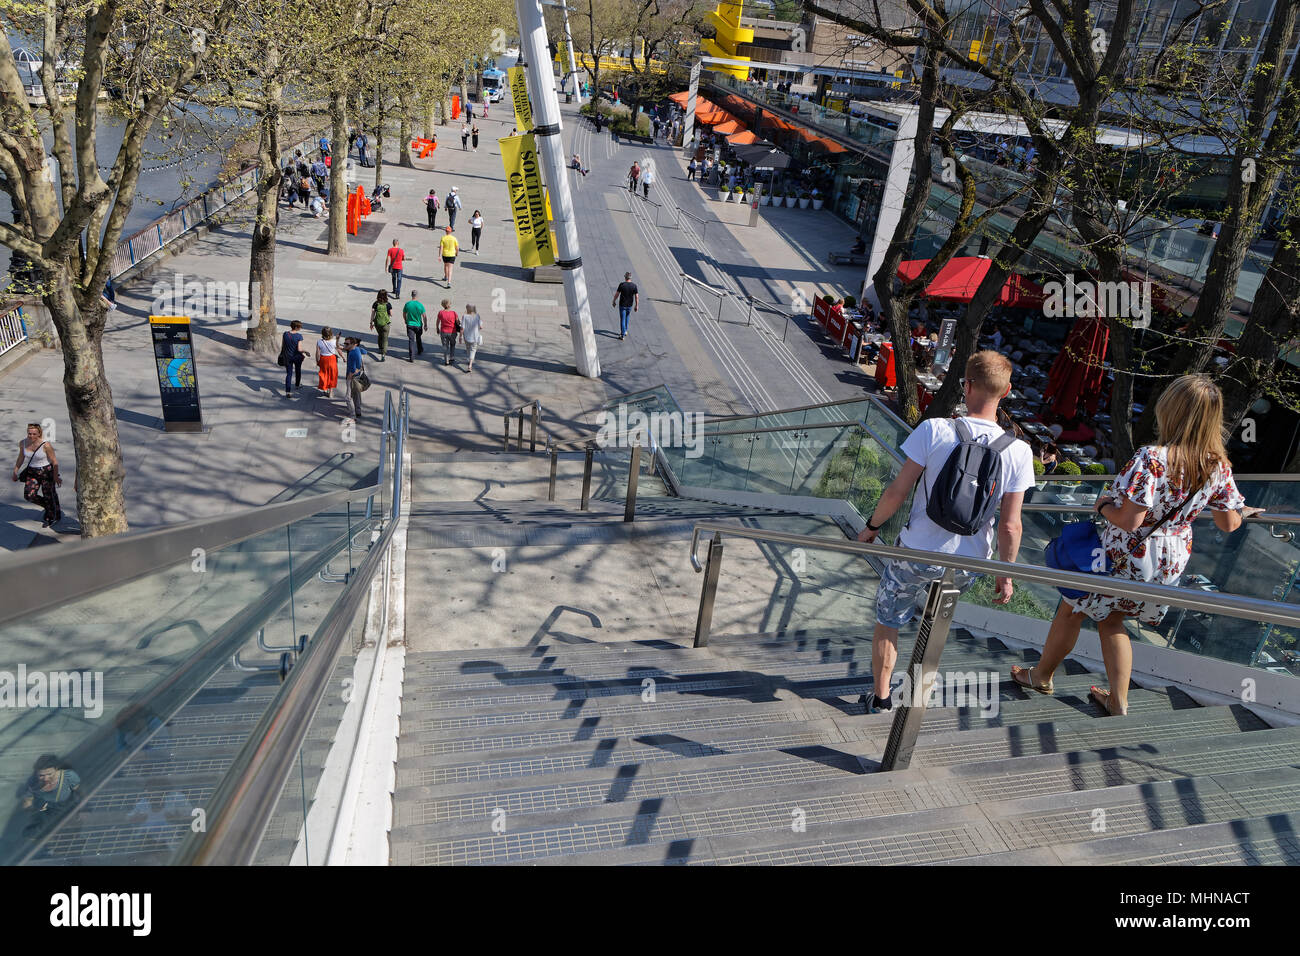 LONDON, GREAT BRITAIN, April 20, 2018 : Crowd on South Bank on a springtime day. South Bank is an entertainment and commercial district, next to the R Stock Photo